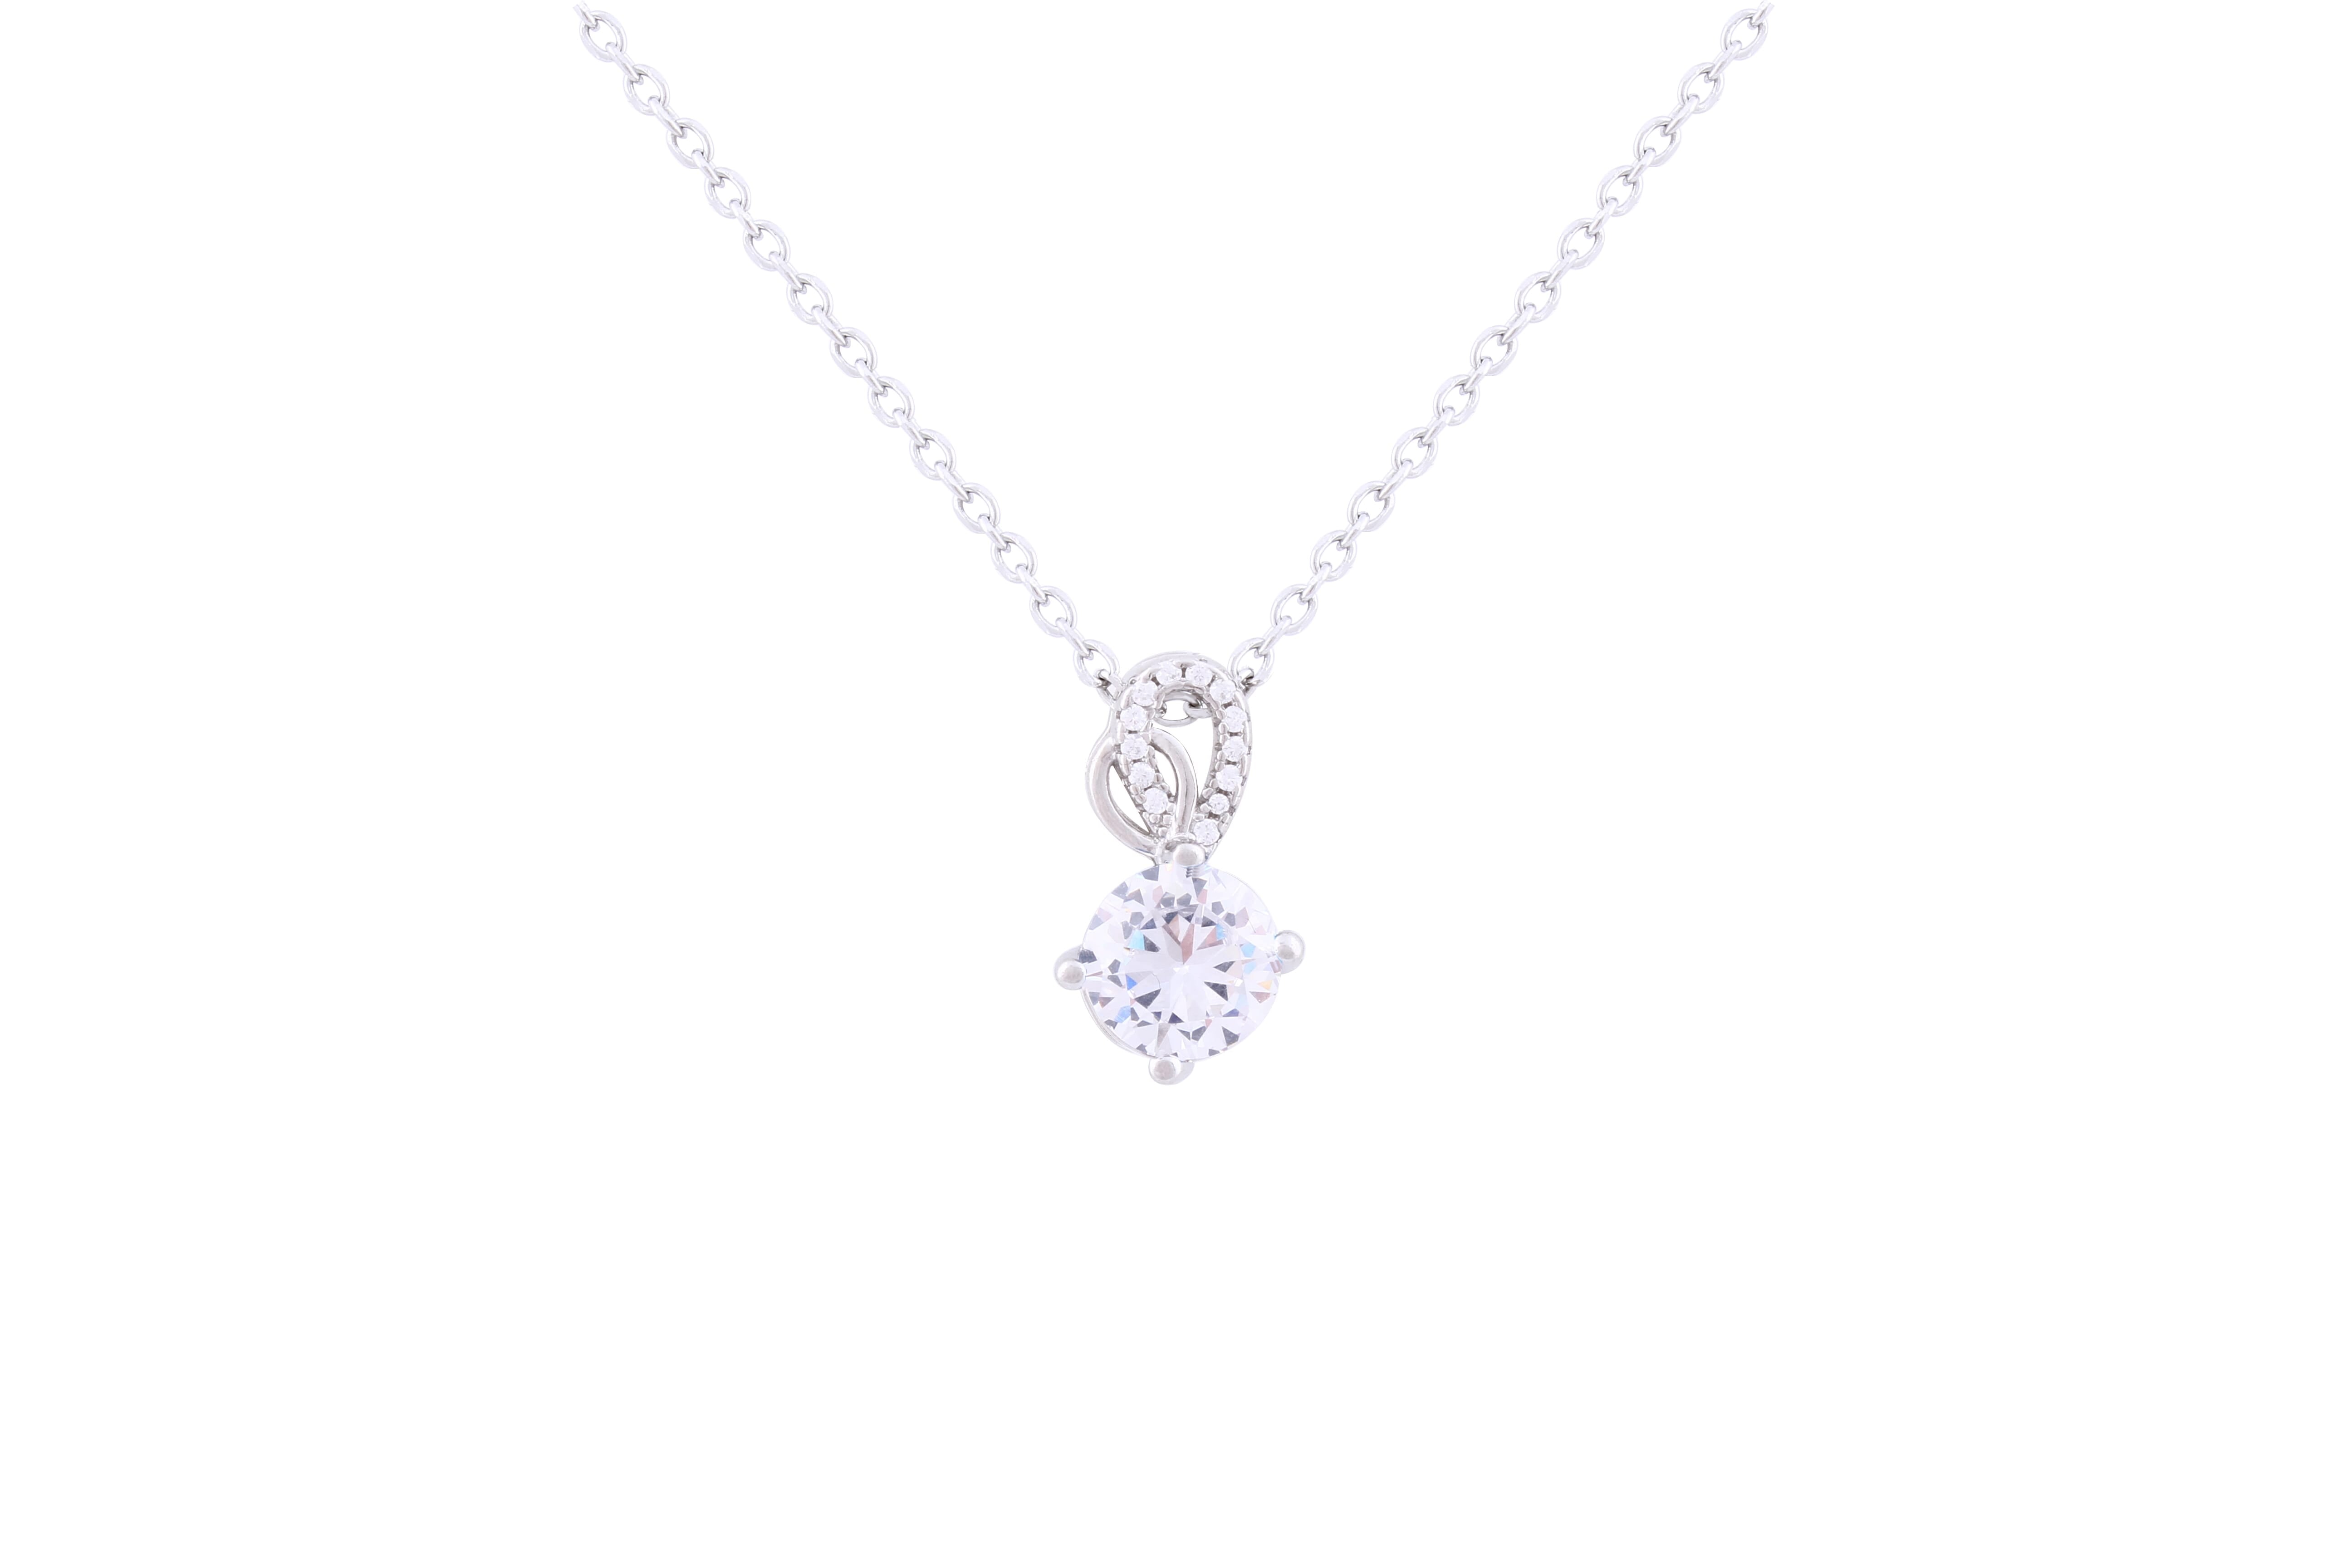 Asfour 925 Sterling Silver Necklace Inlaid With Zircon Stone NR0500-W